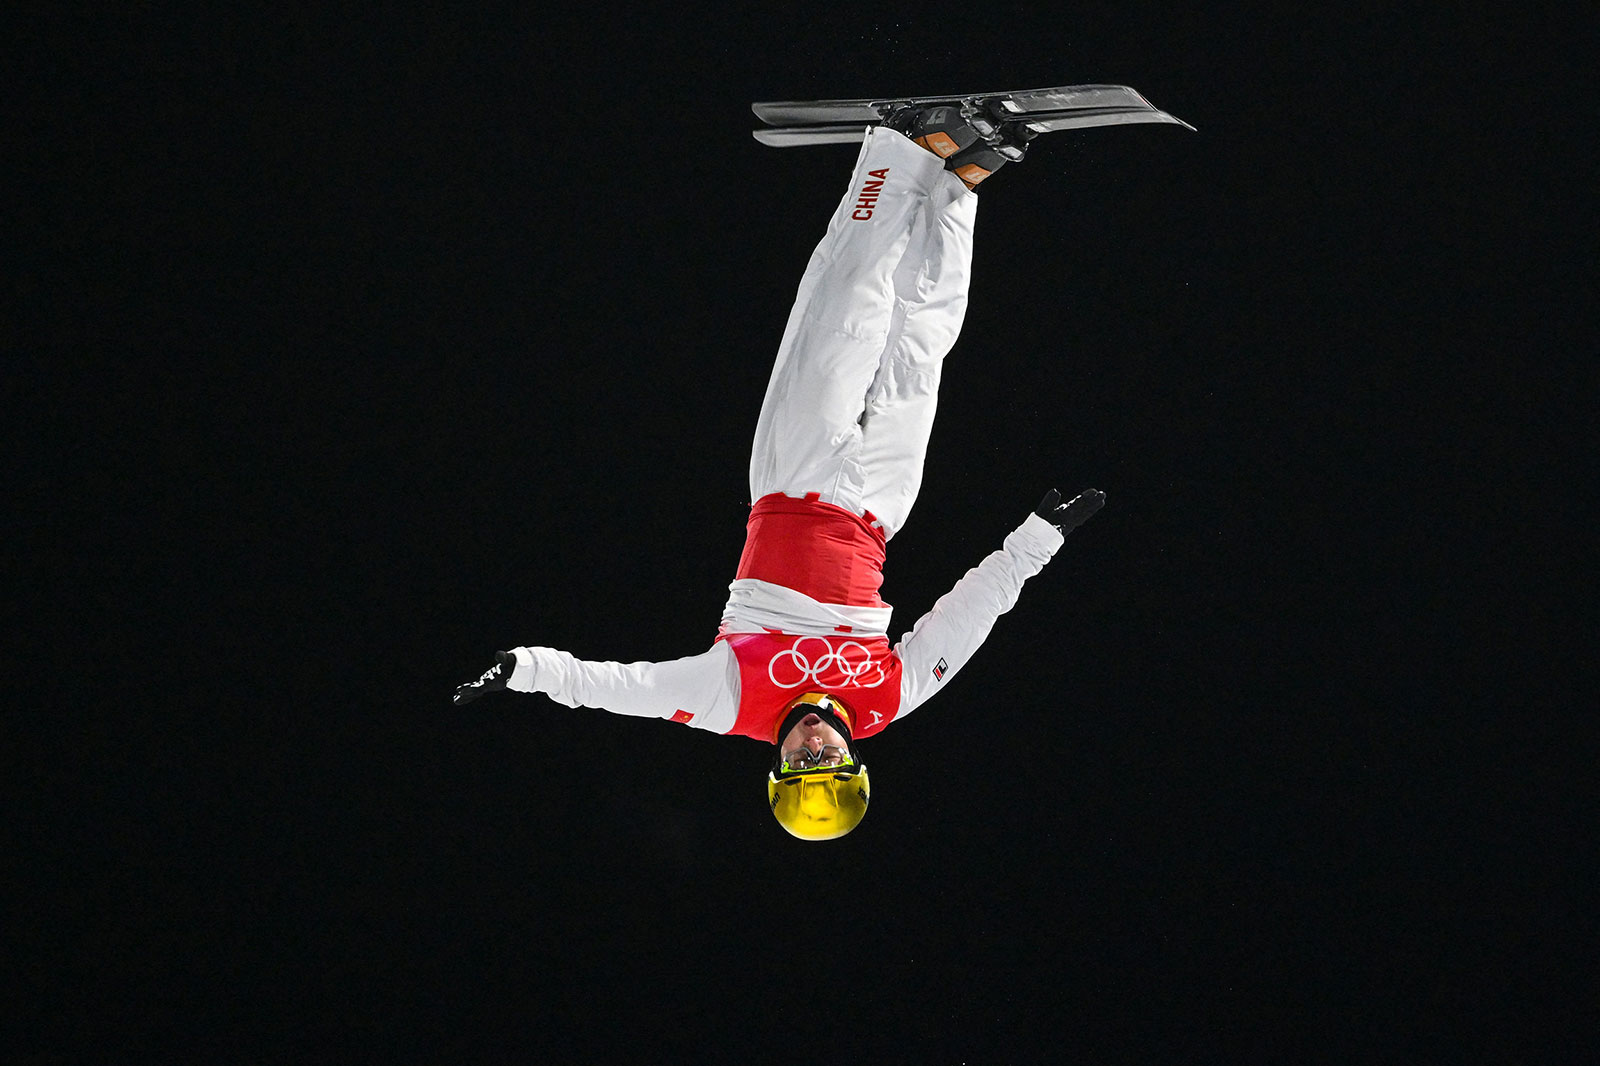 China's Qi Guangpu competes in the freestyle skiing aerials on February 16.